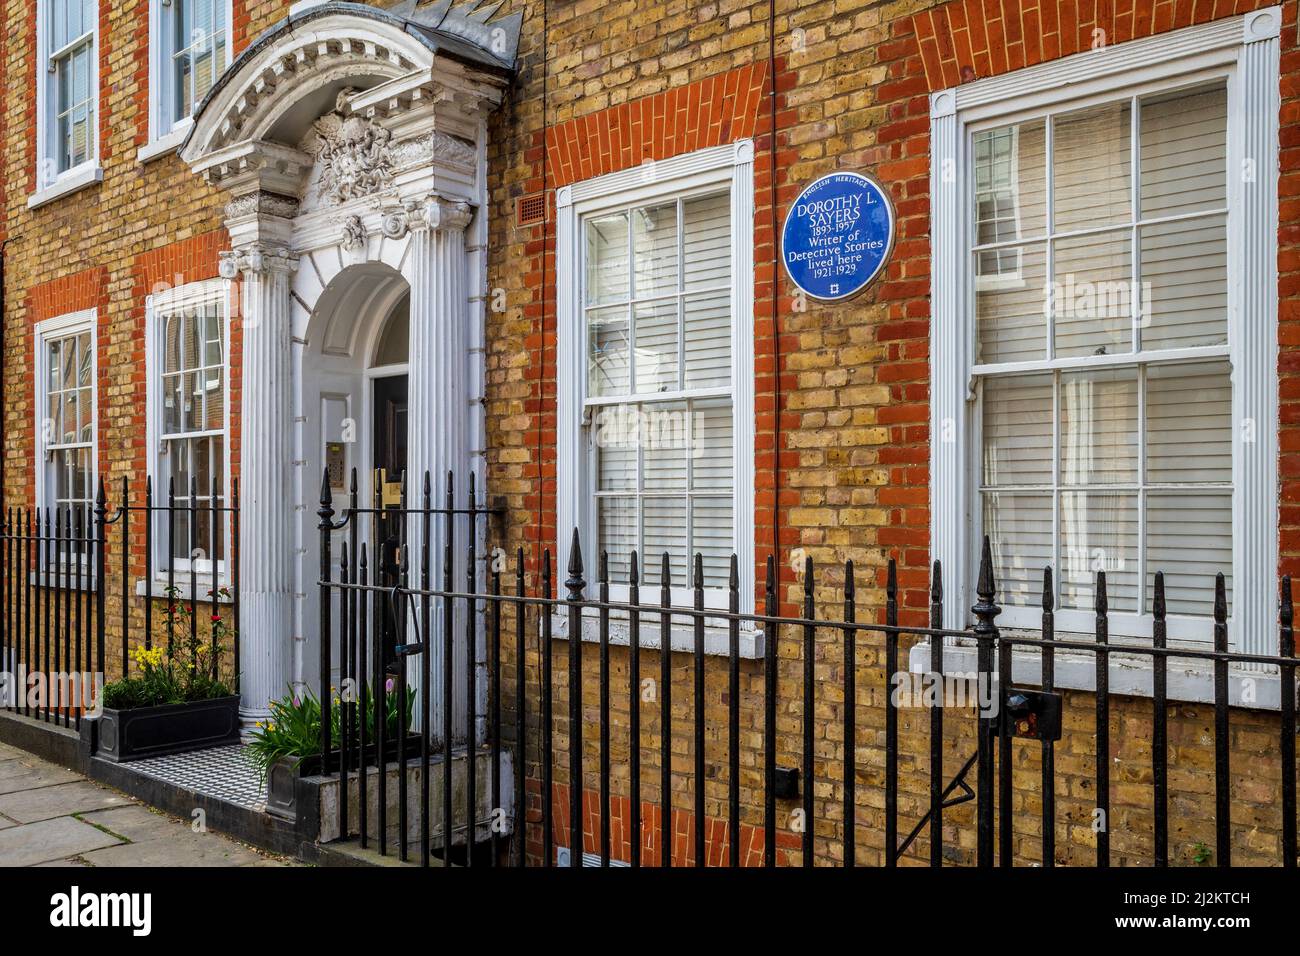 Dorothy L Sayers House (1893 - 1957), author of detective fiction, lived at 24 Great James Street 1921 - 1929. London Plaque 2000 by English Heritage Stock Photo